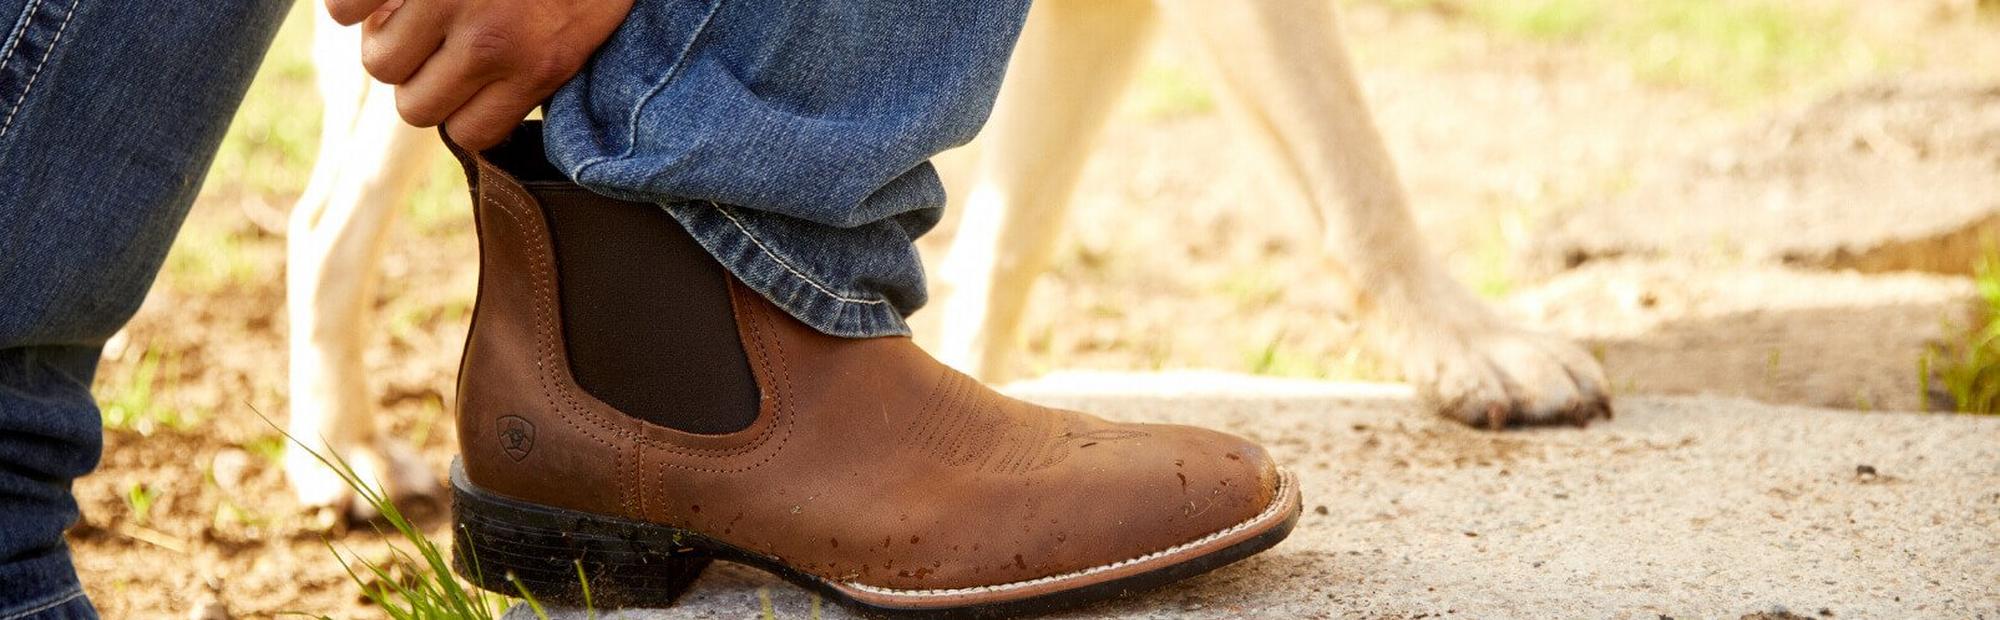 Cowboy Boots - Square vs Pointed Toe | Ariat